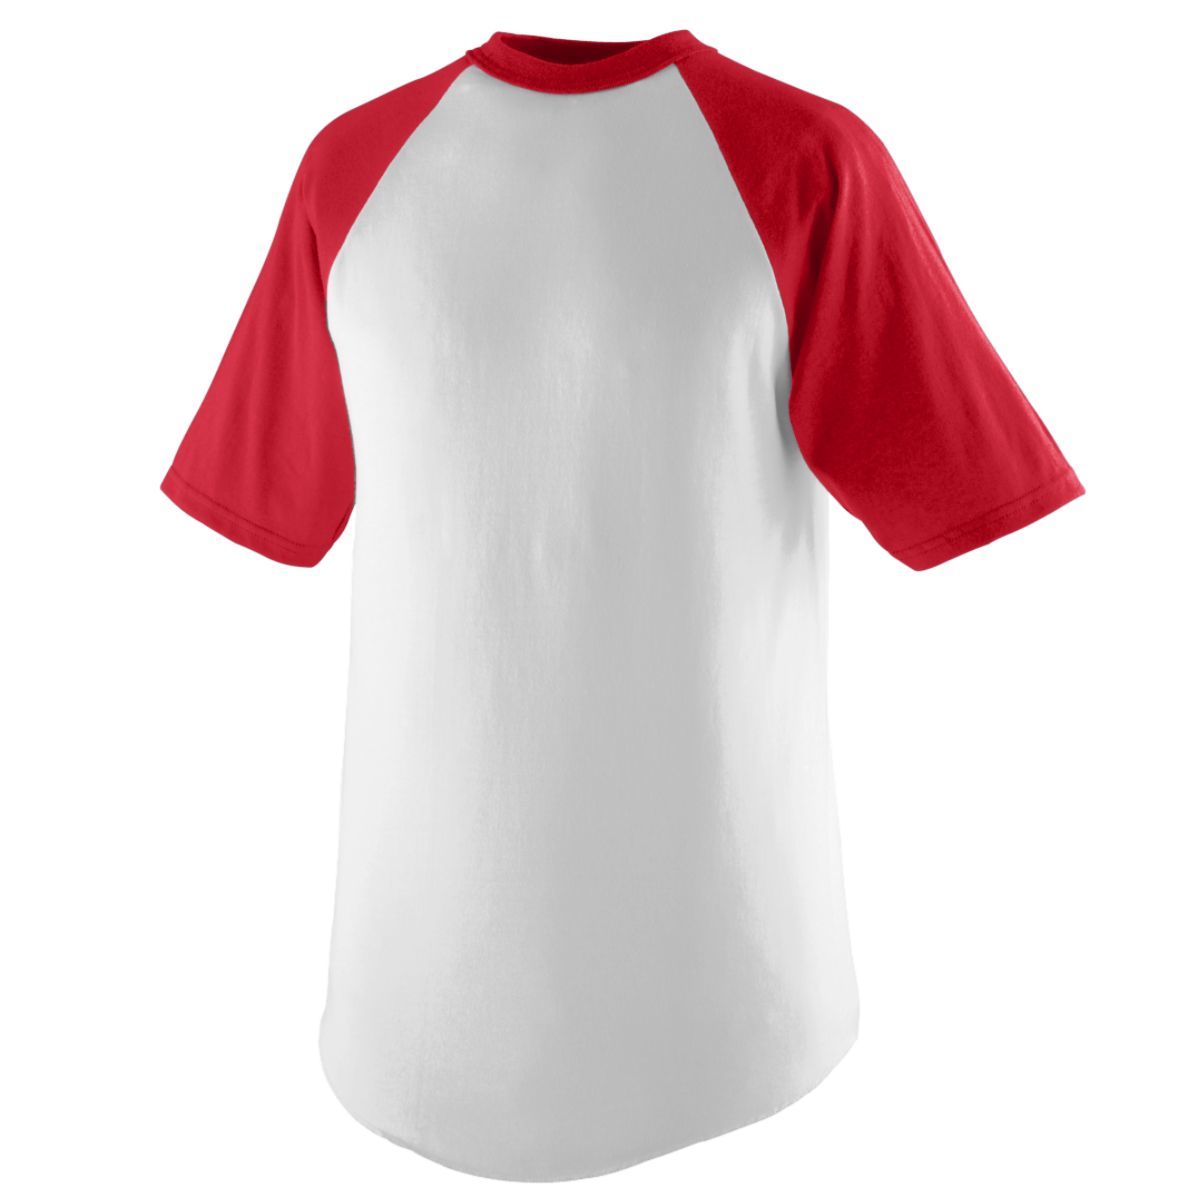 Augusta Sportswear Youth Short Sleeve Baseball Jersey in White/Red  -Part of the Youth, Youth-Jersey, Augusta-Products, Baseball, Shirts, All-Sports, All-Sports-1 product lines at KanaleyCreations.com